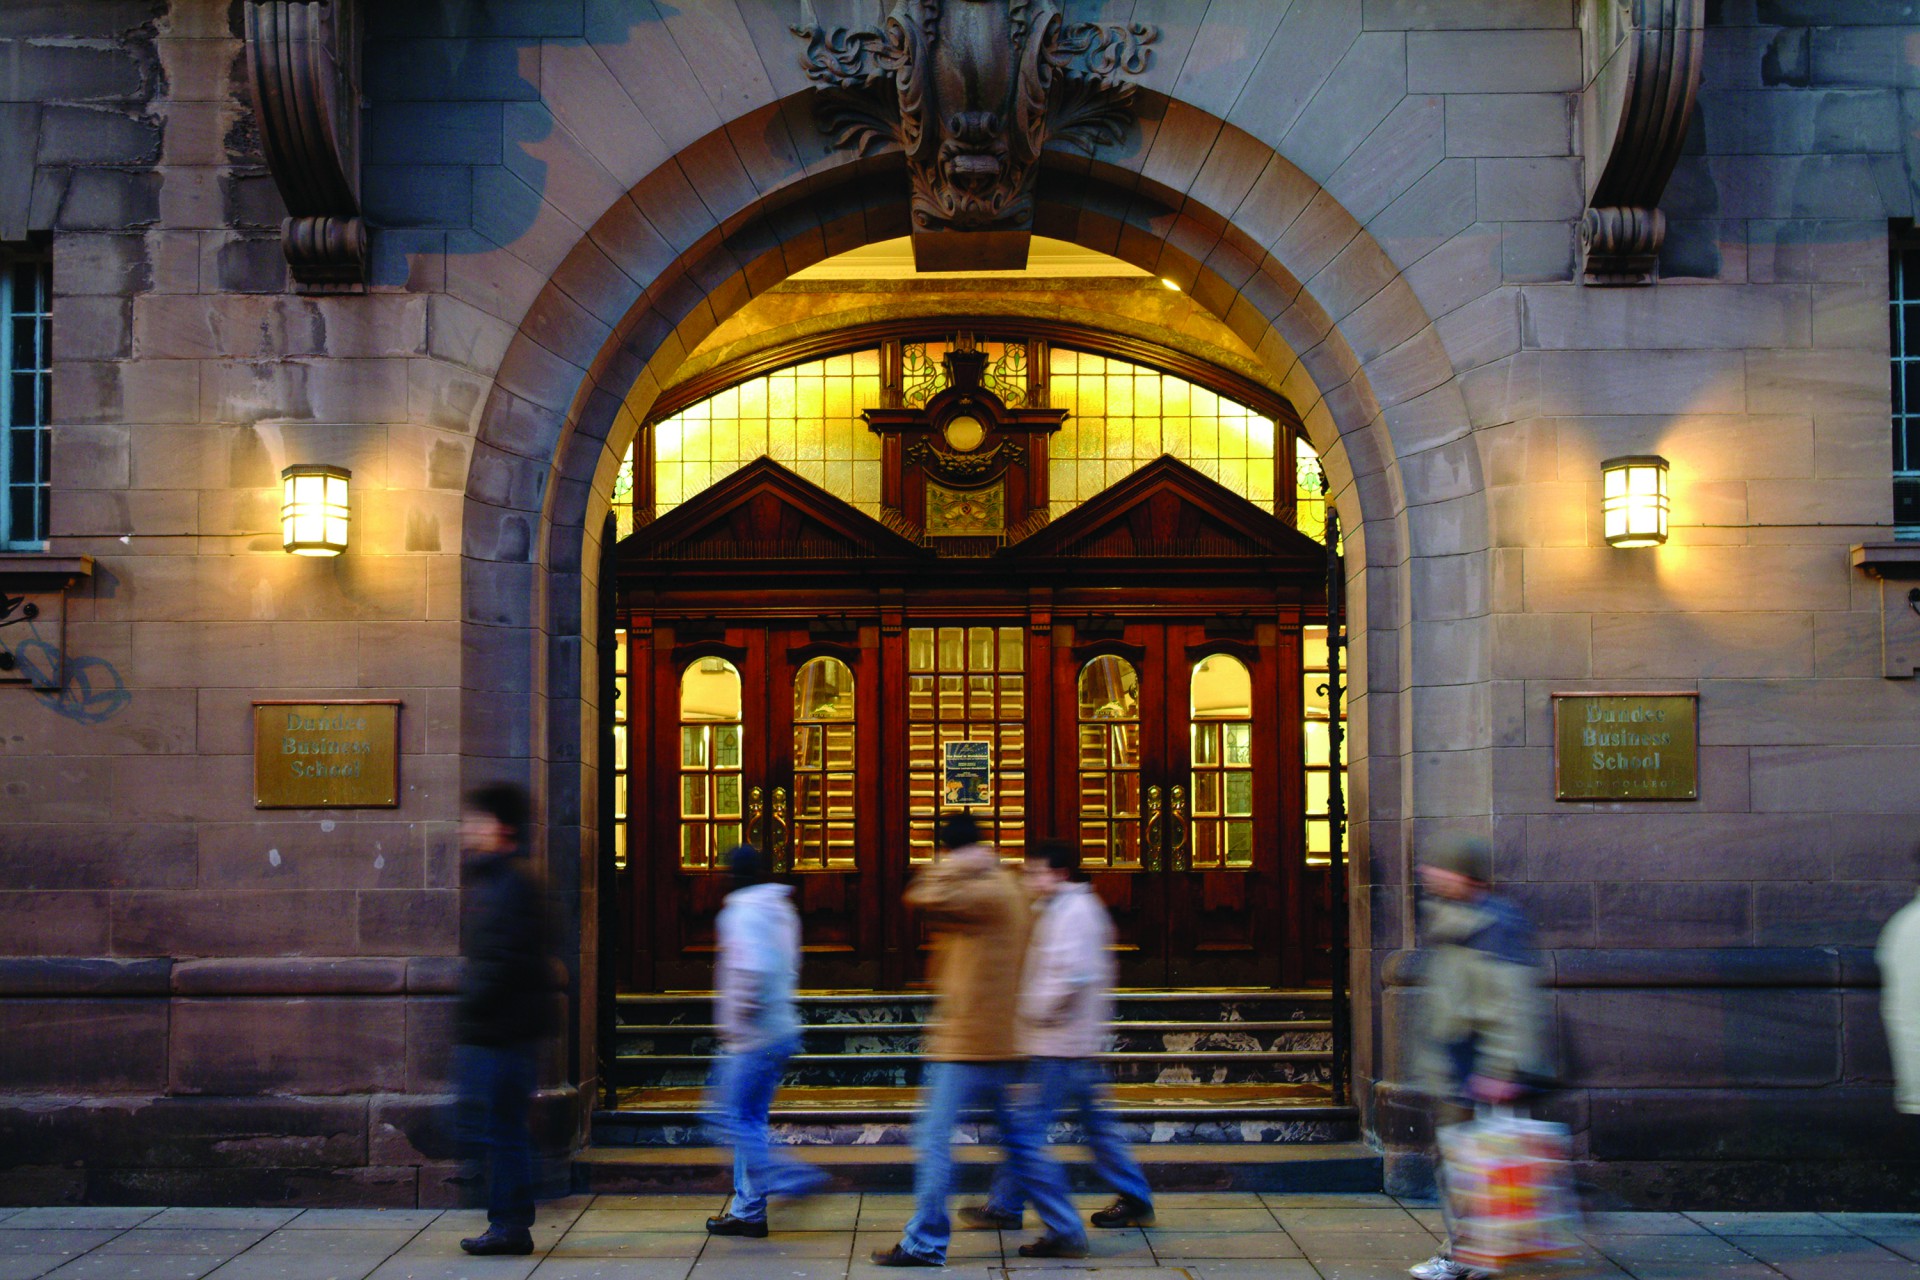 The Old College, used by Dundee Business School